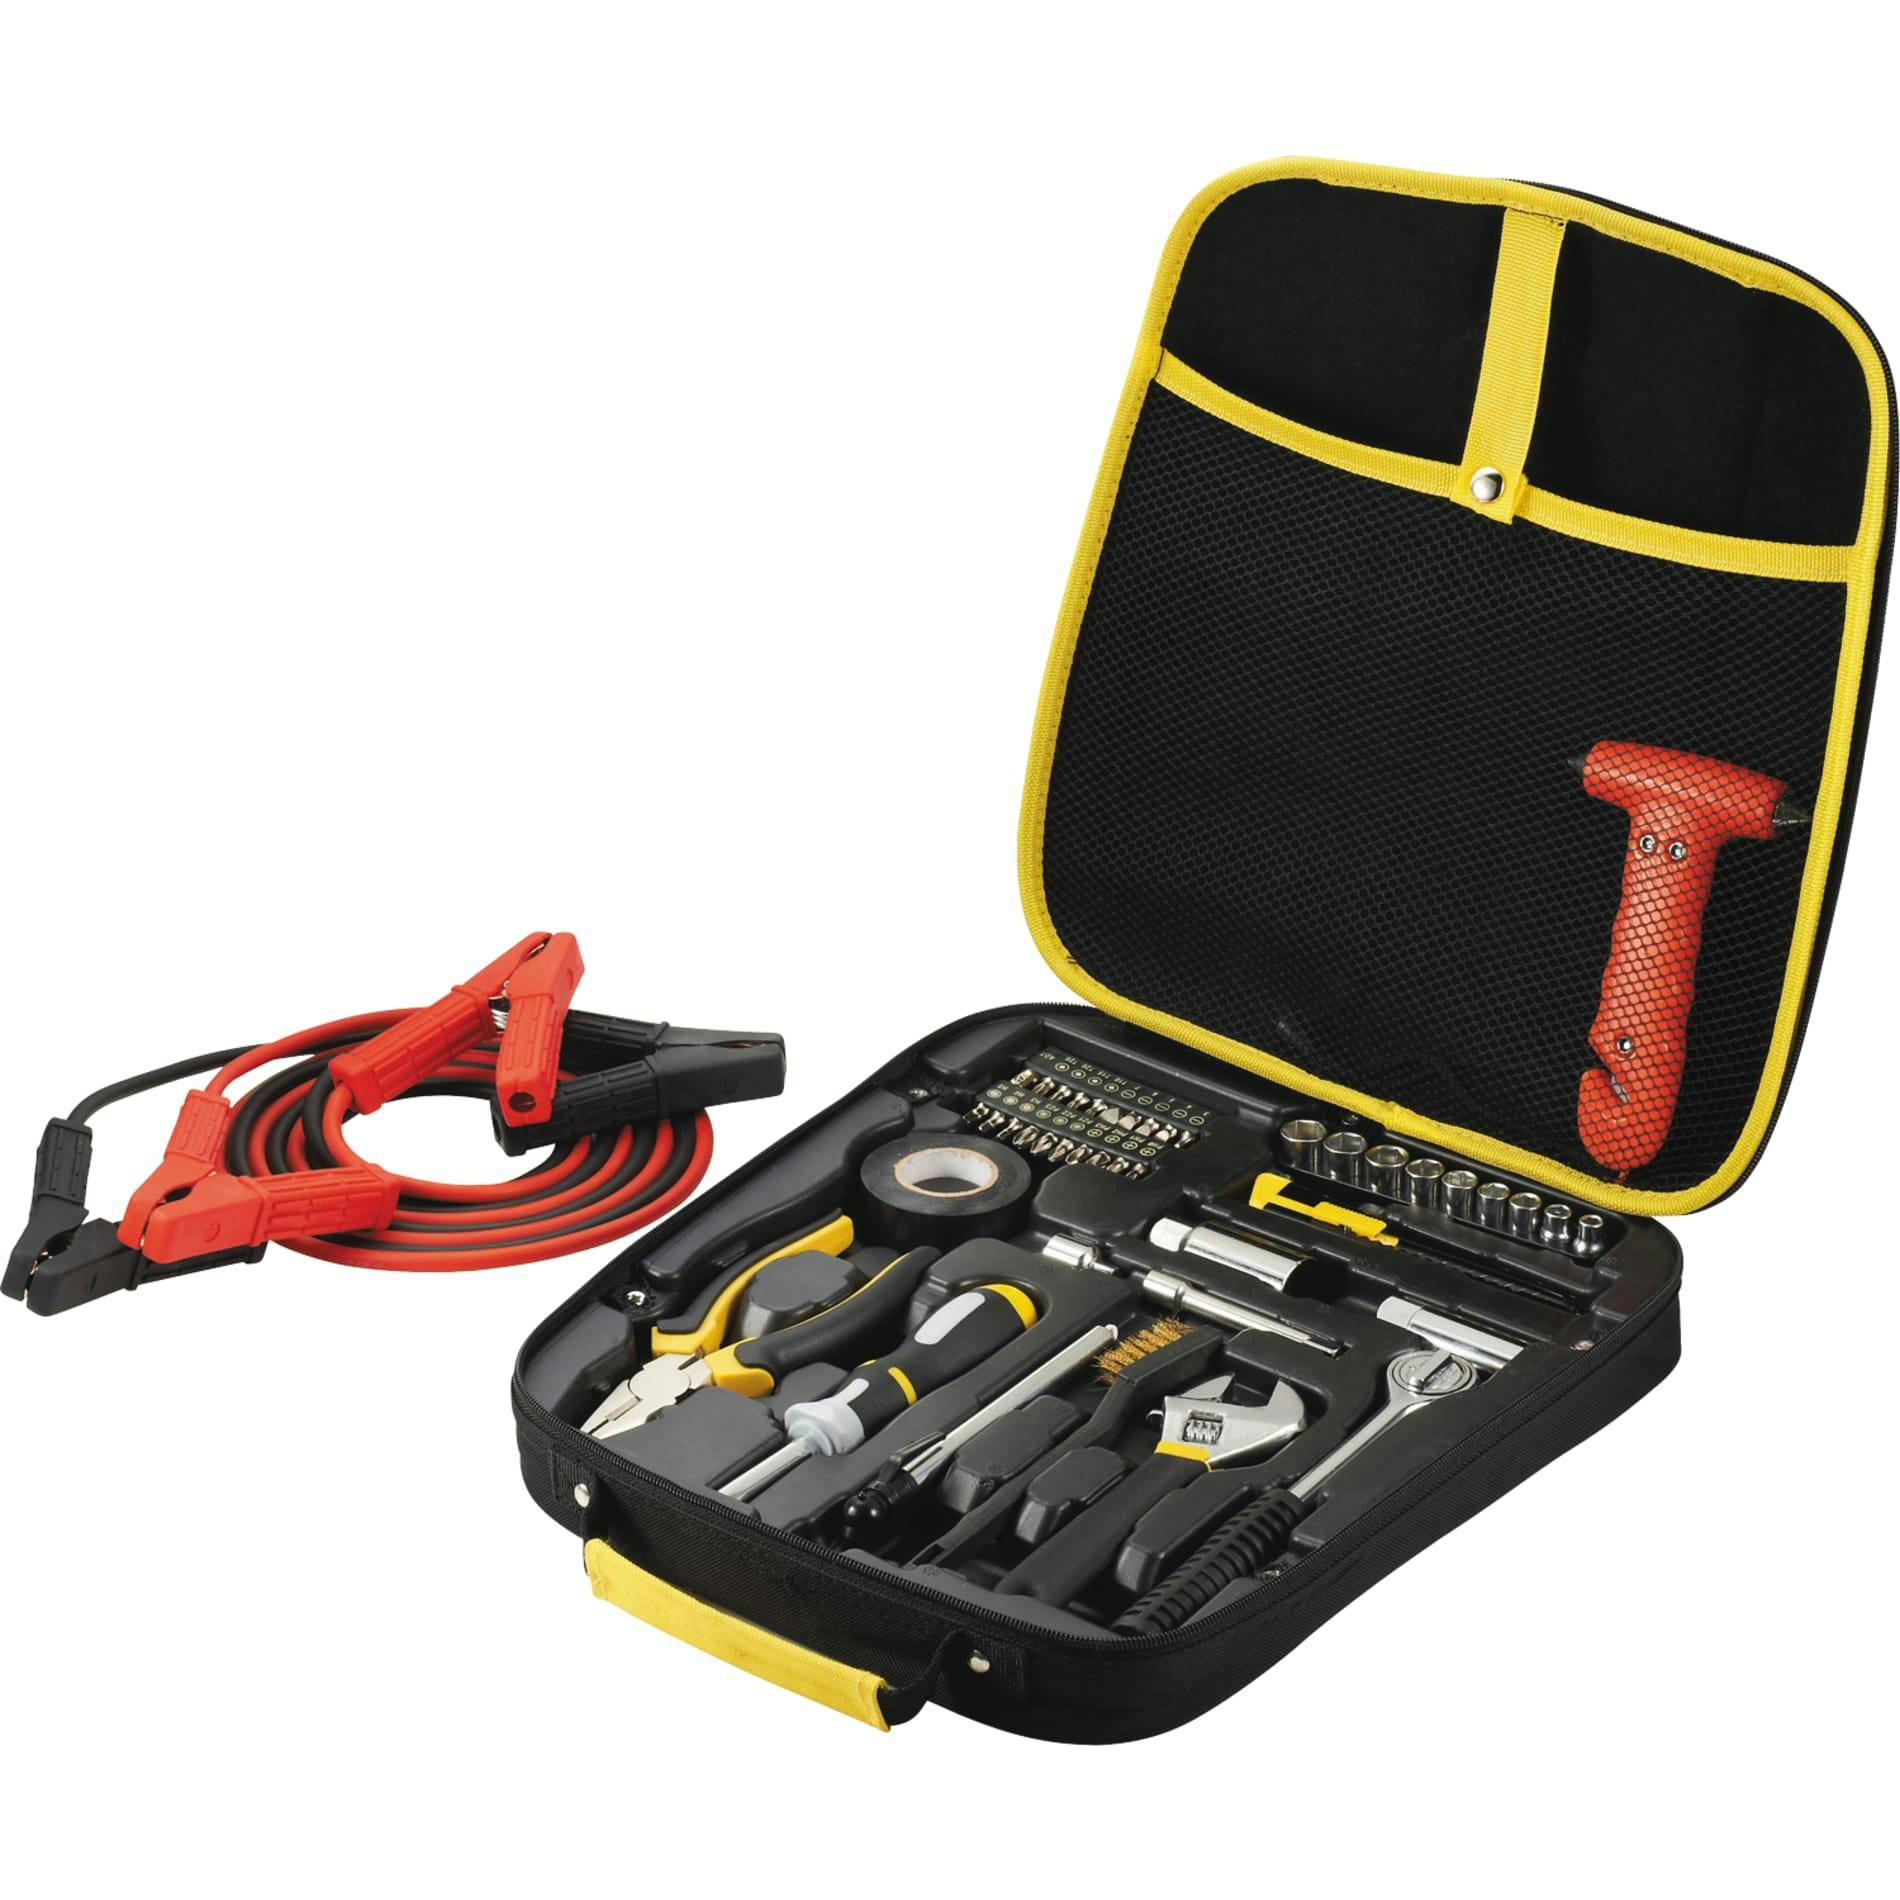 Highway Deluxe Roadside Kit with Tools - additional Image 3